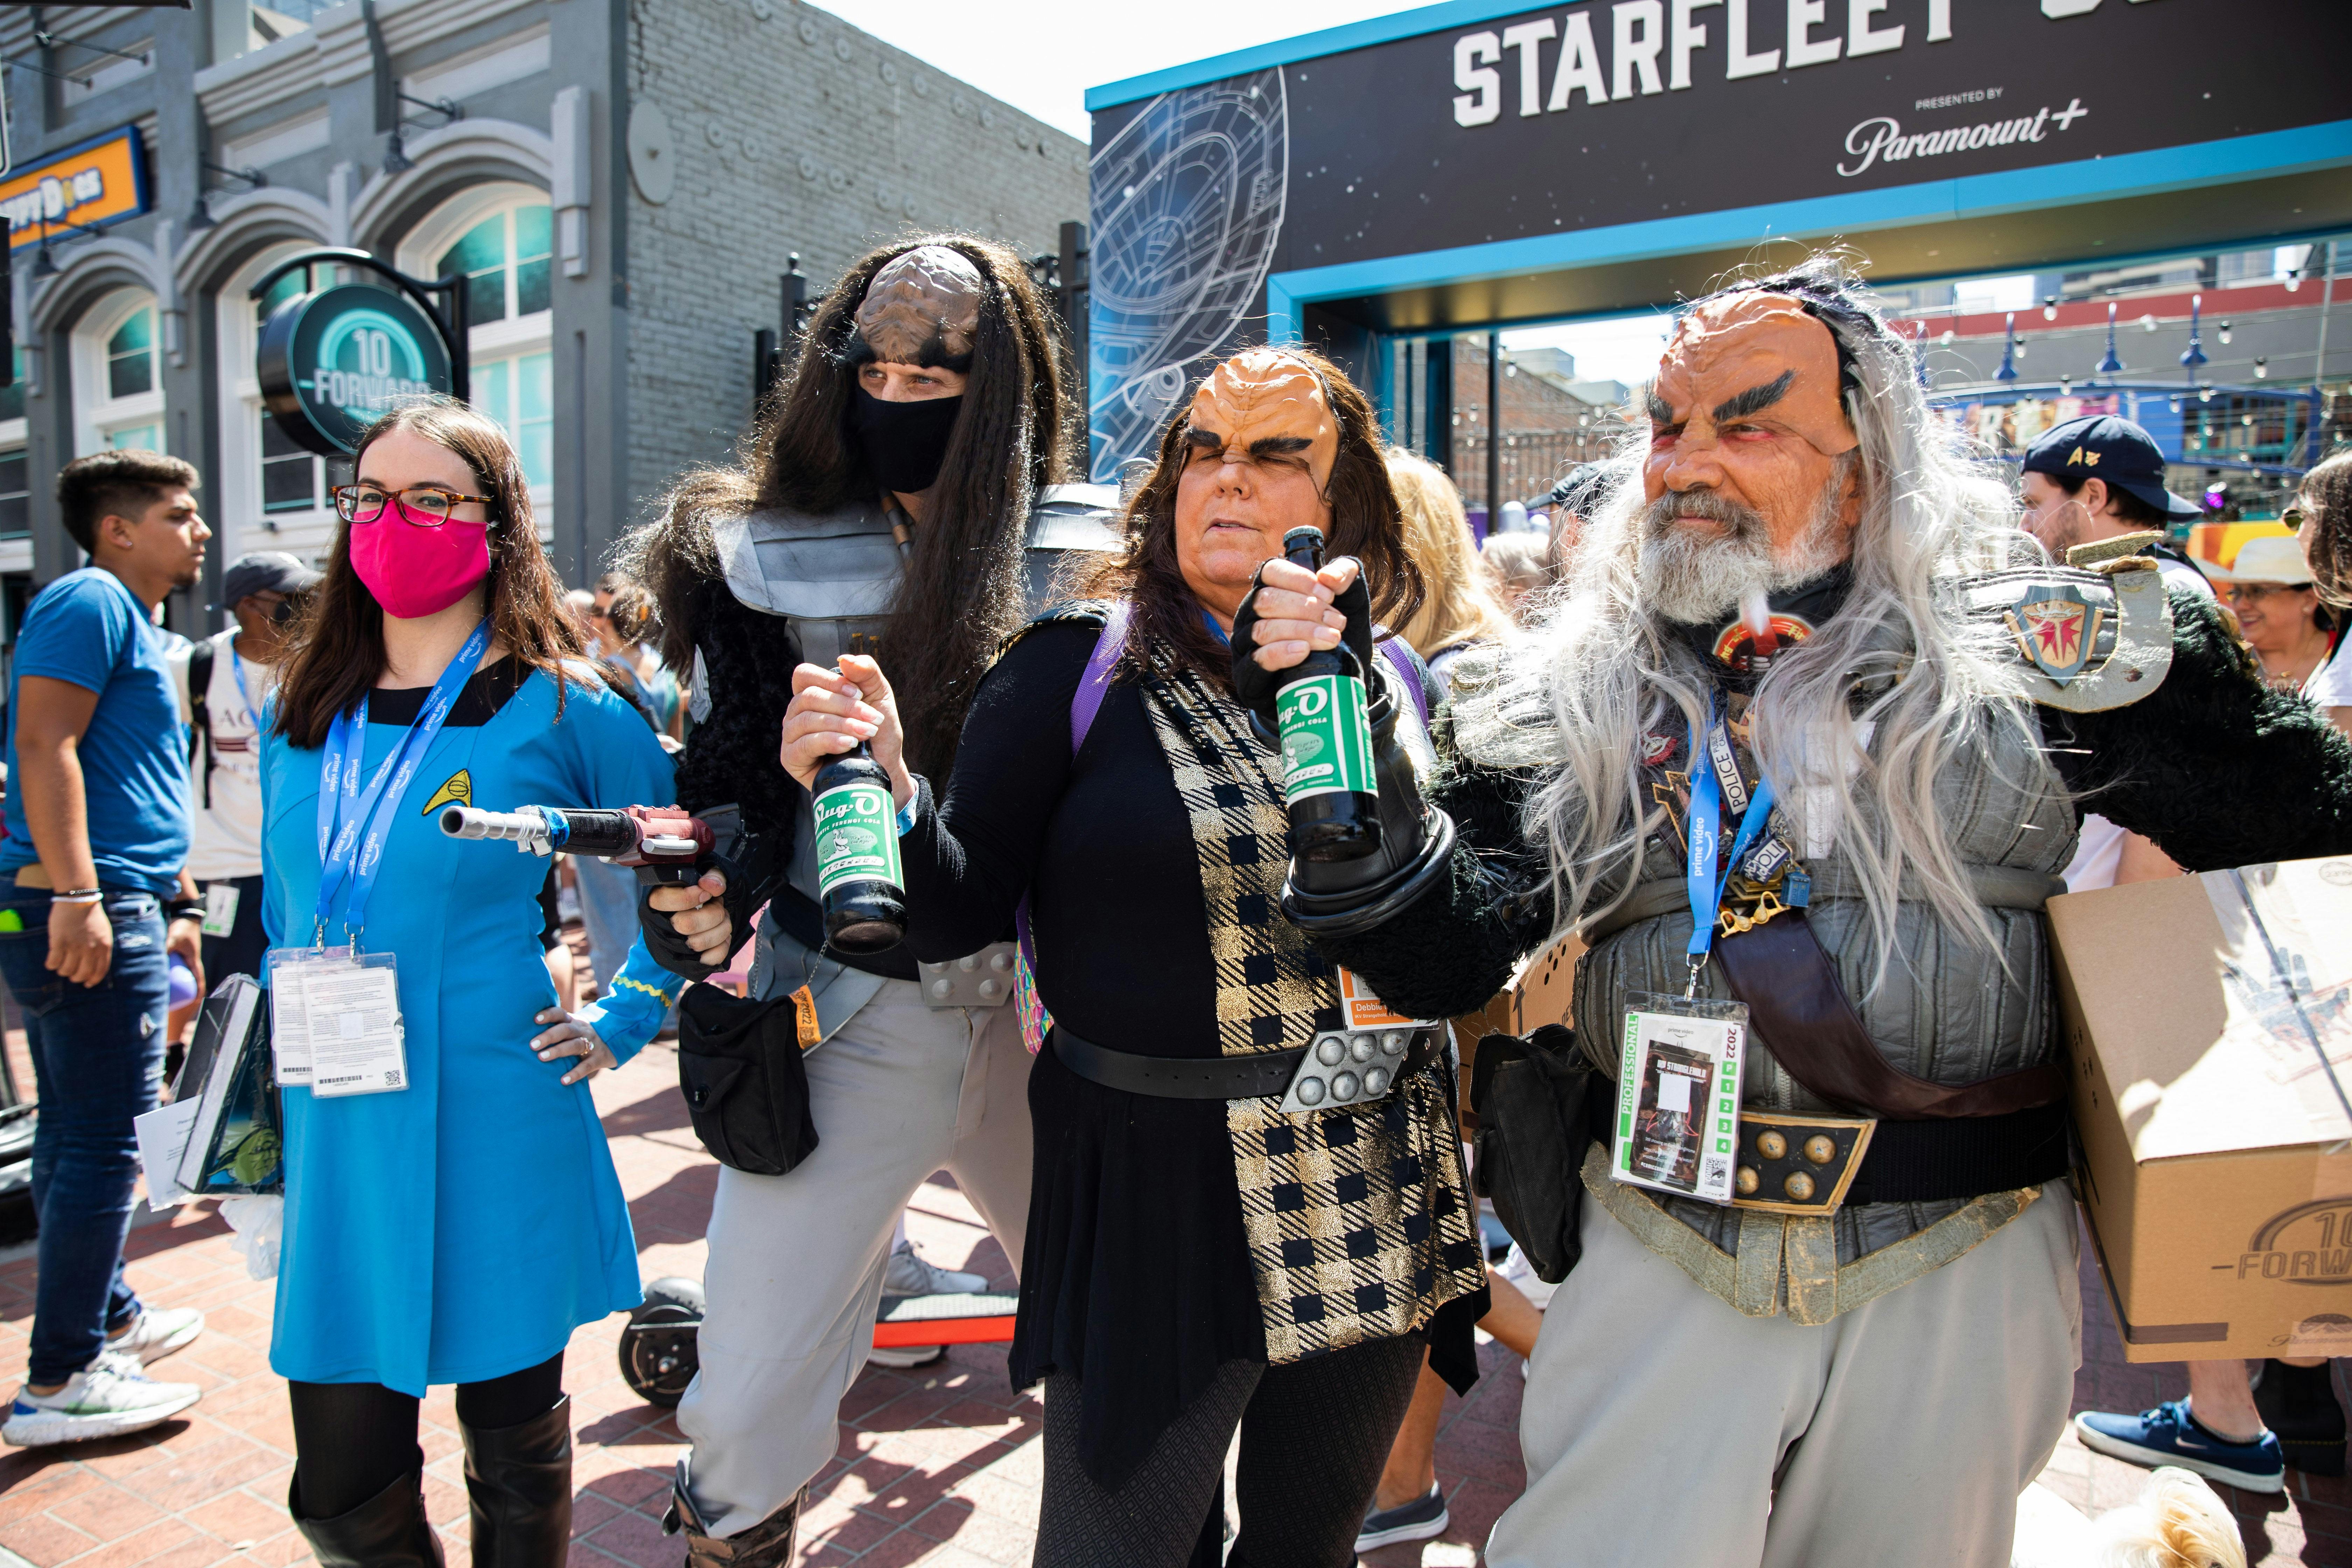 A Starfleet officer and several Klingons pose for a photo.